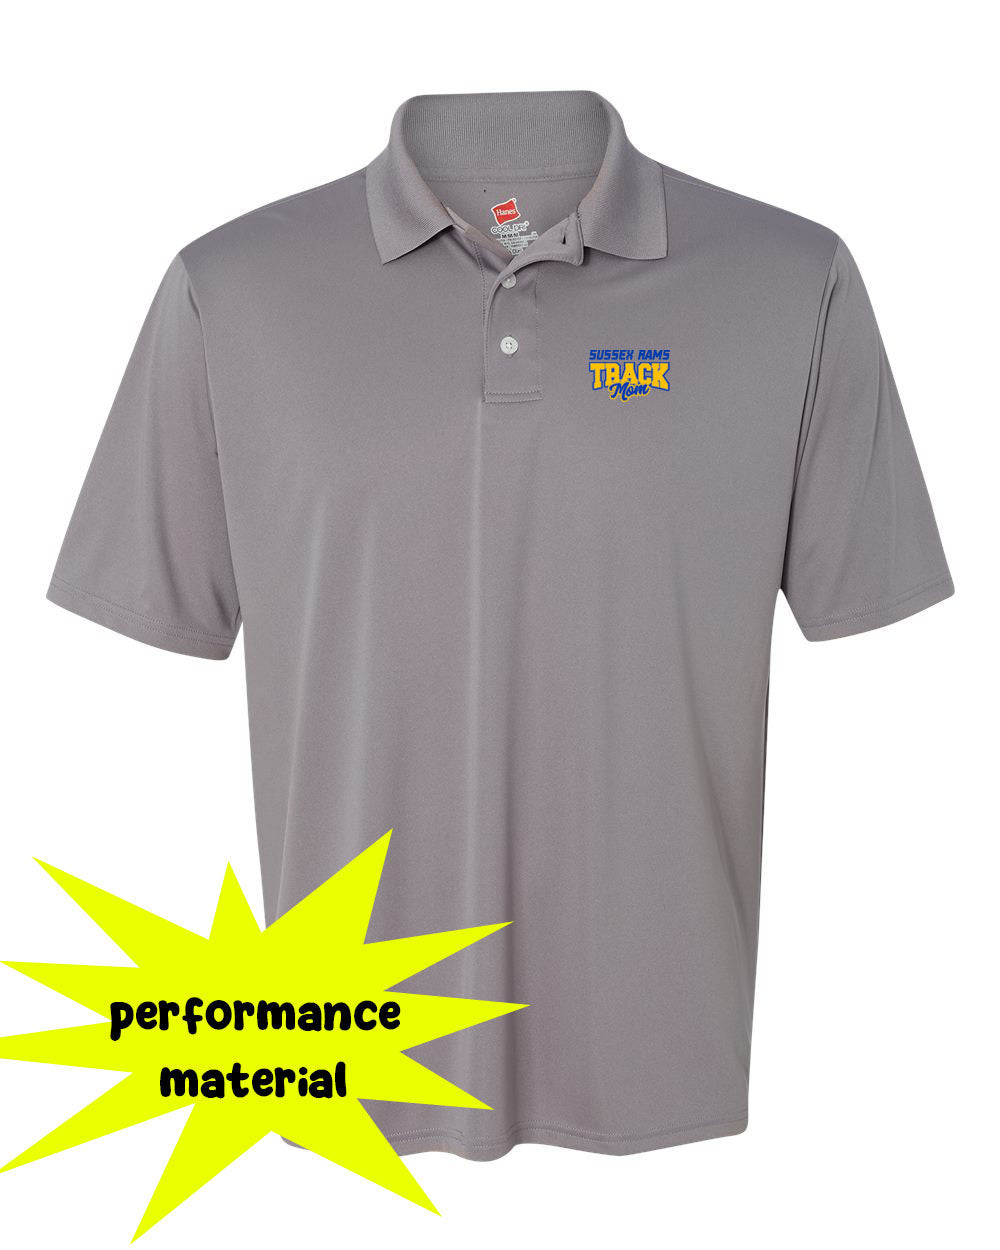 Sussex Rams Track Performance Material Polo T-Shirt Design 1